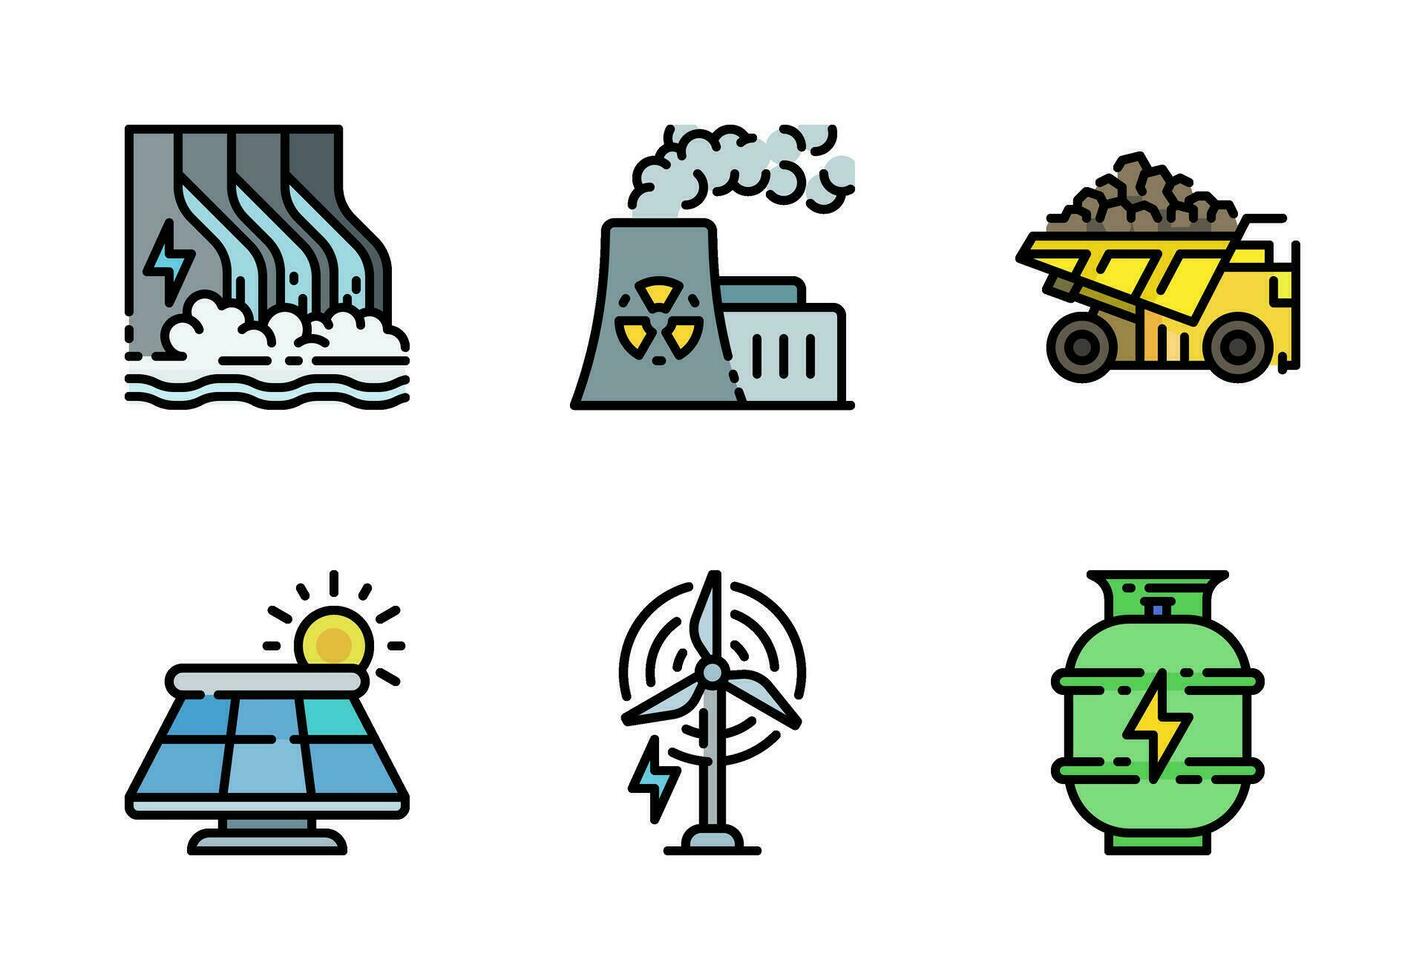 Power Plants icon set vector in colored outline style, it contains hydropower, nuclear reactor, solar panel, wind power, natural gass, and coal mine.